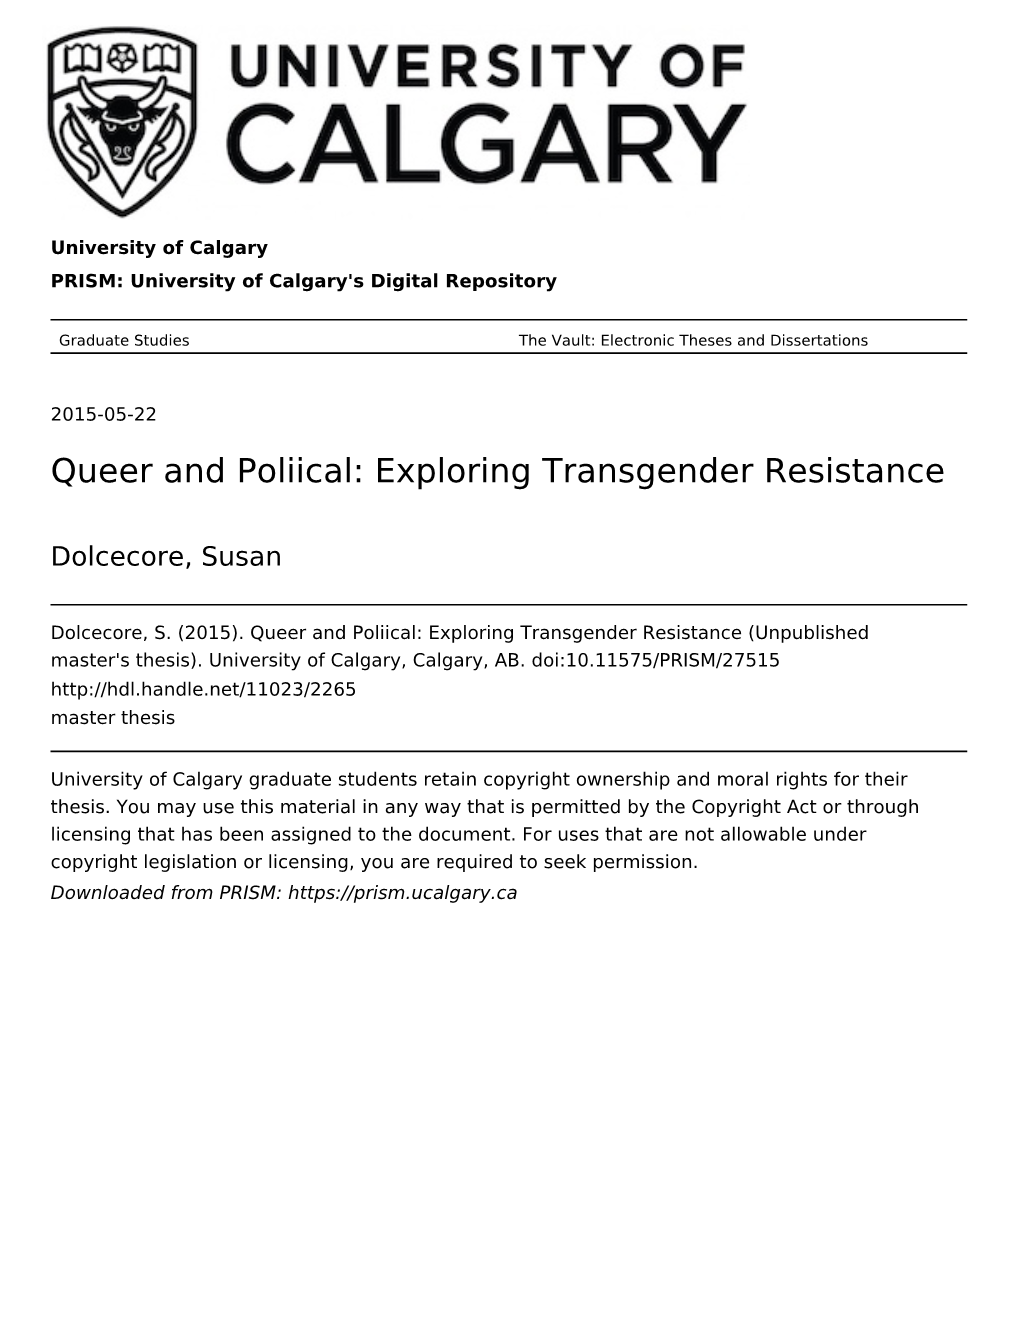 Queer and Poliical: Exploring Transgender Resistance